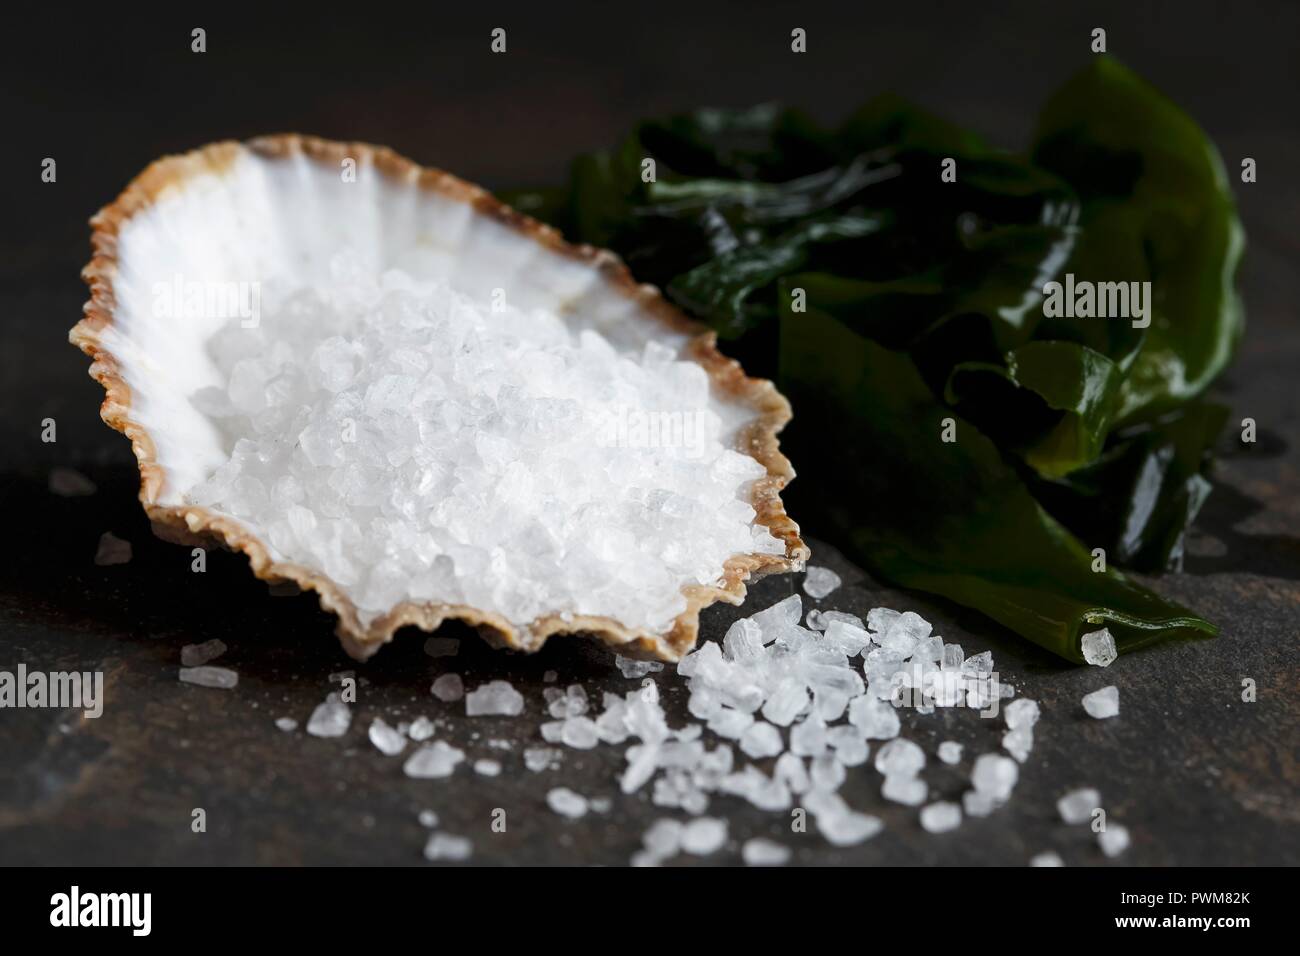 Coarse salt in a sea shell next to wakame seaweed and spilled salt, on dark stone. Stock Photo